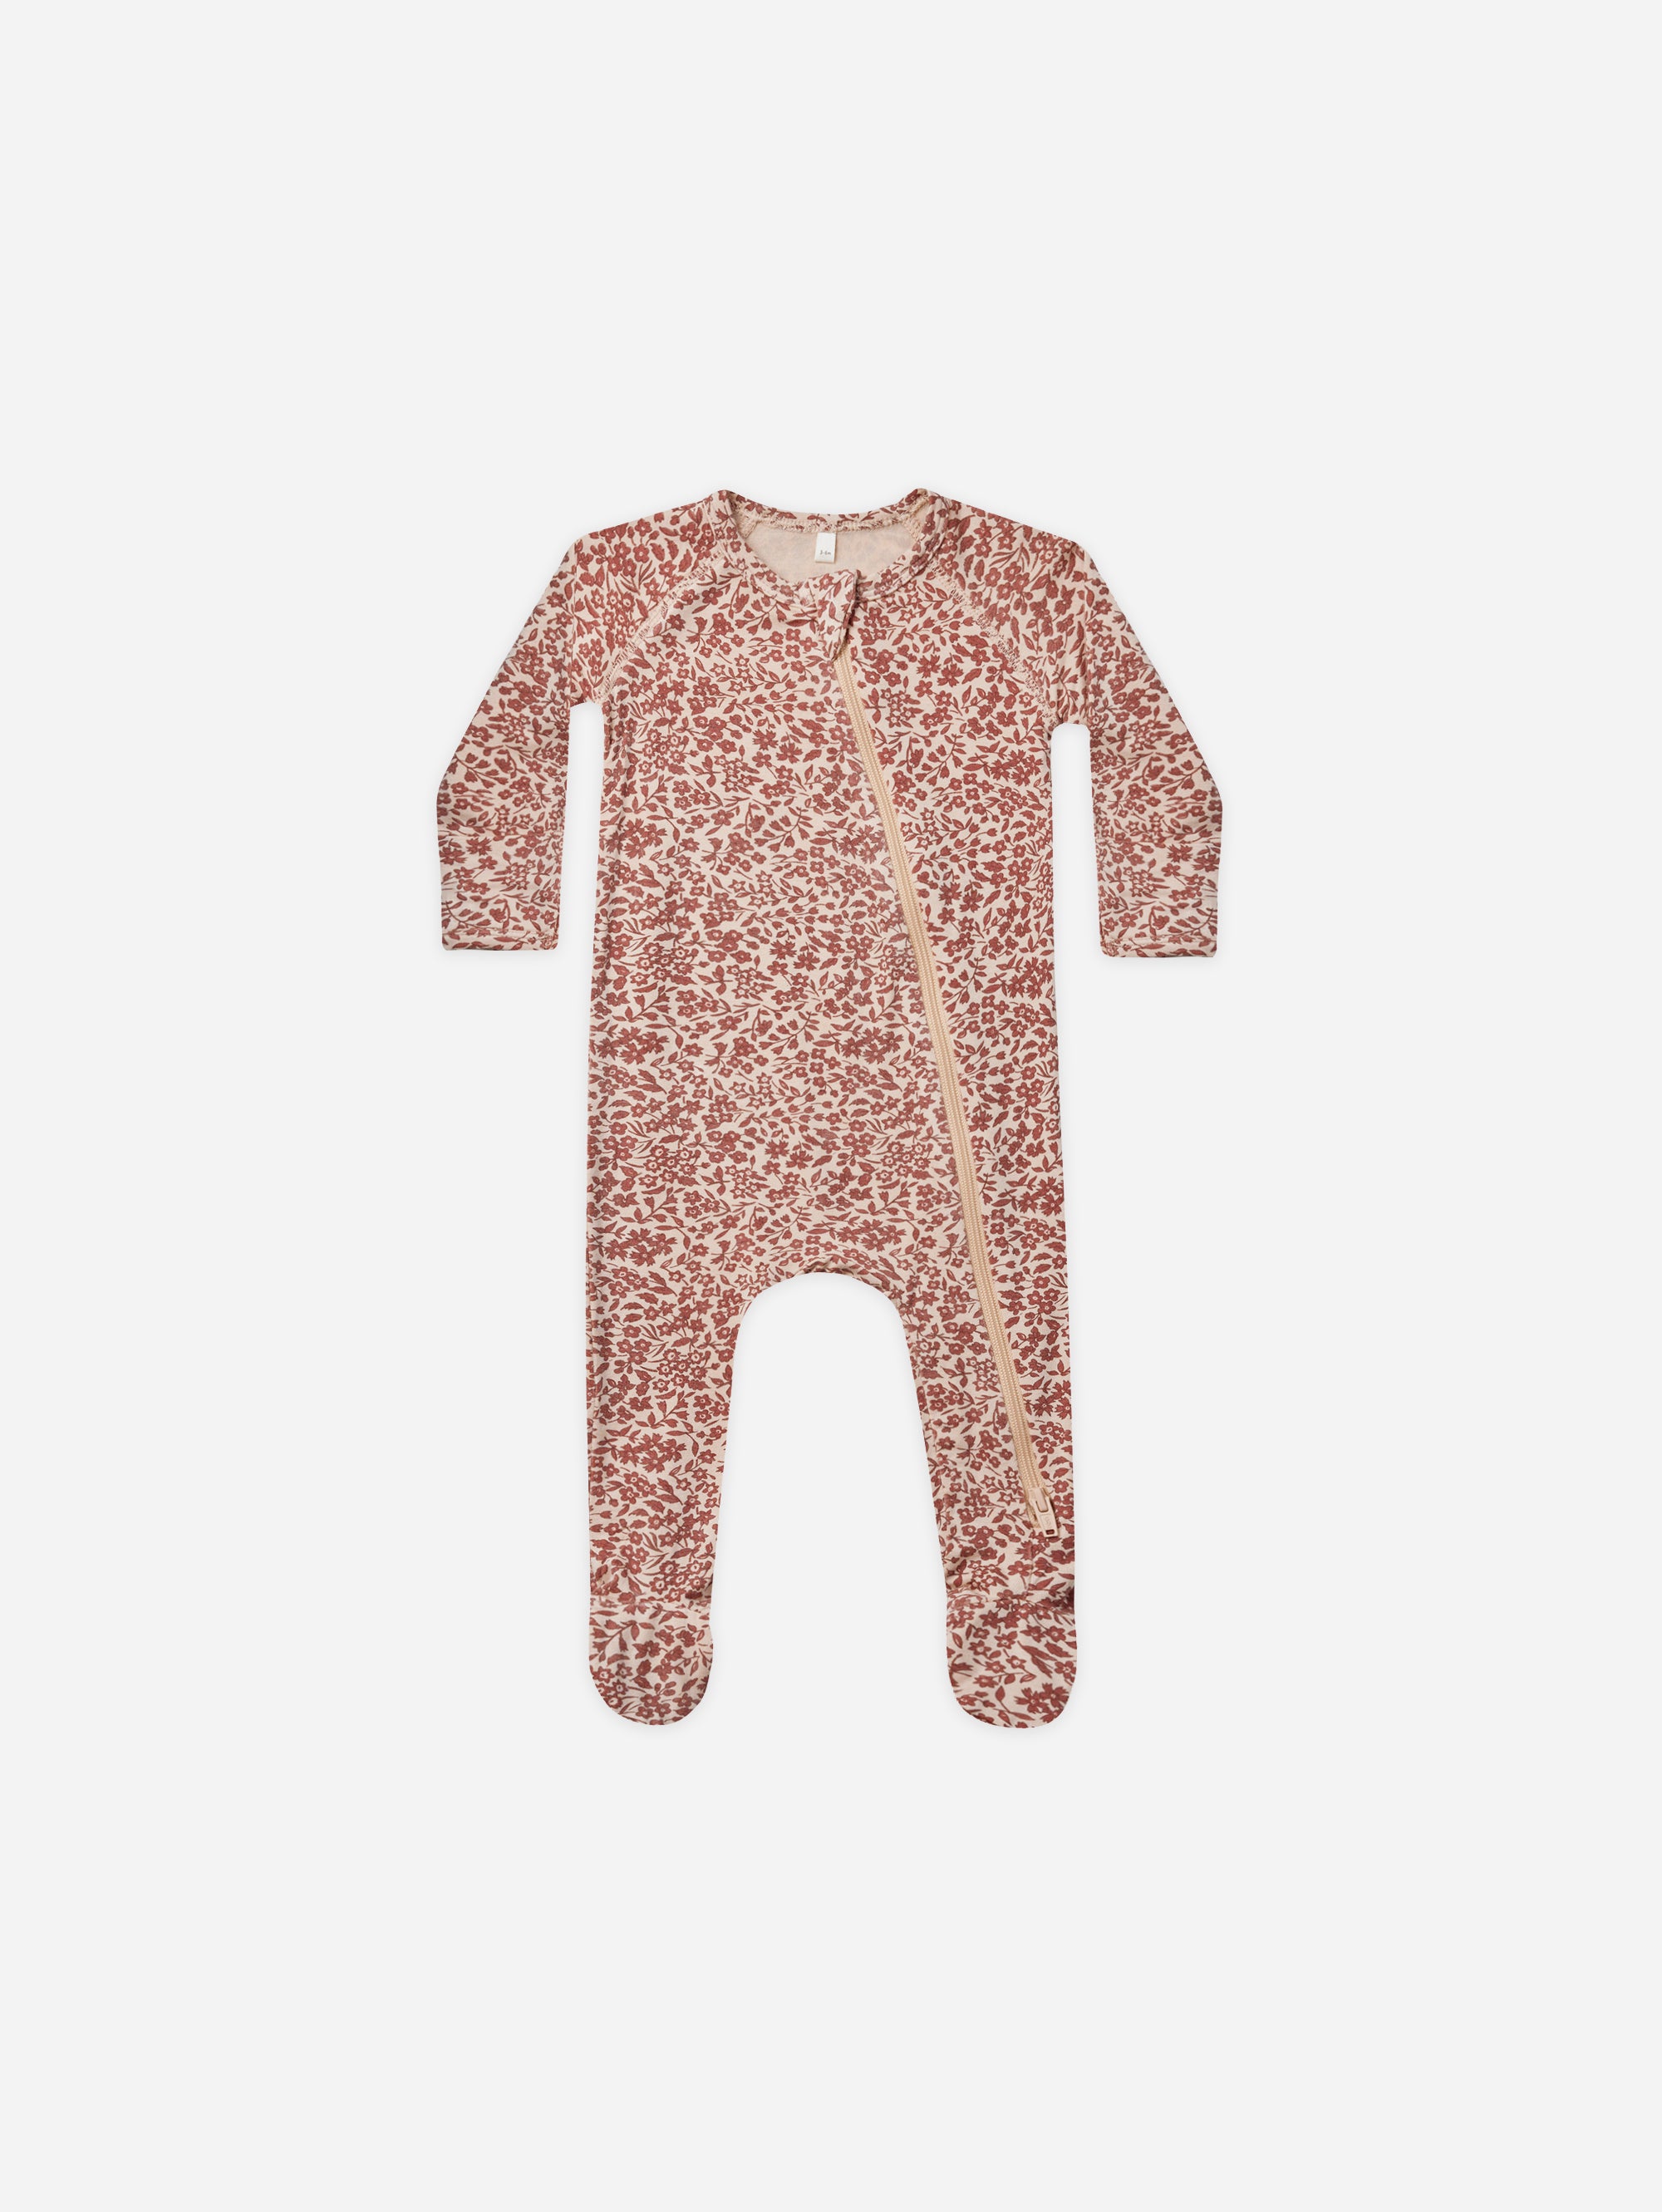 Bamboo Zip Footie || Flower Field - Rylee + Cru | Kids Clothes | Trendy Baby Clothes | Modern Infant Outfits |